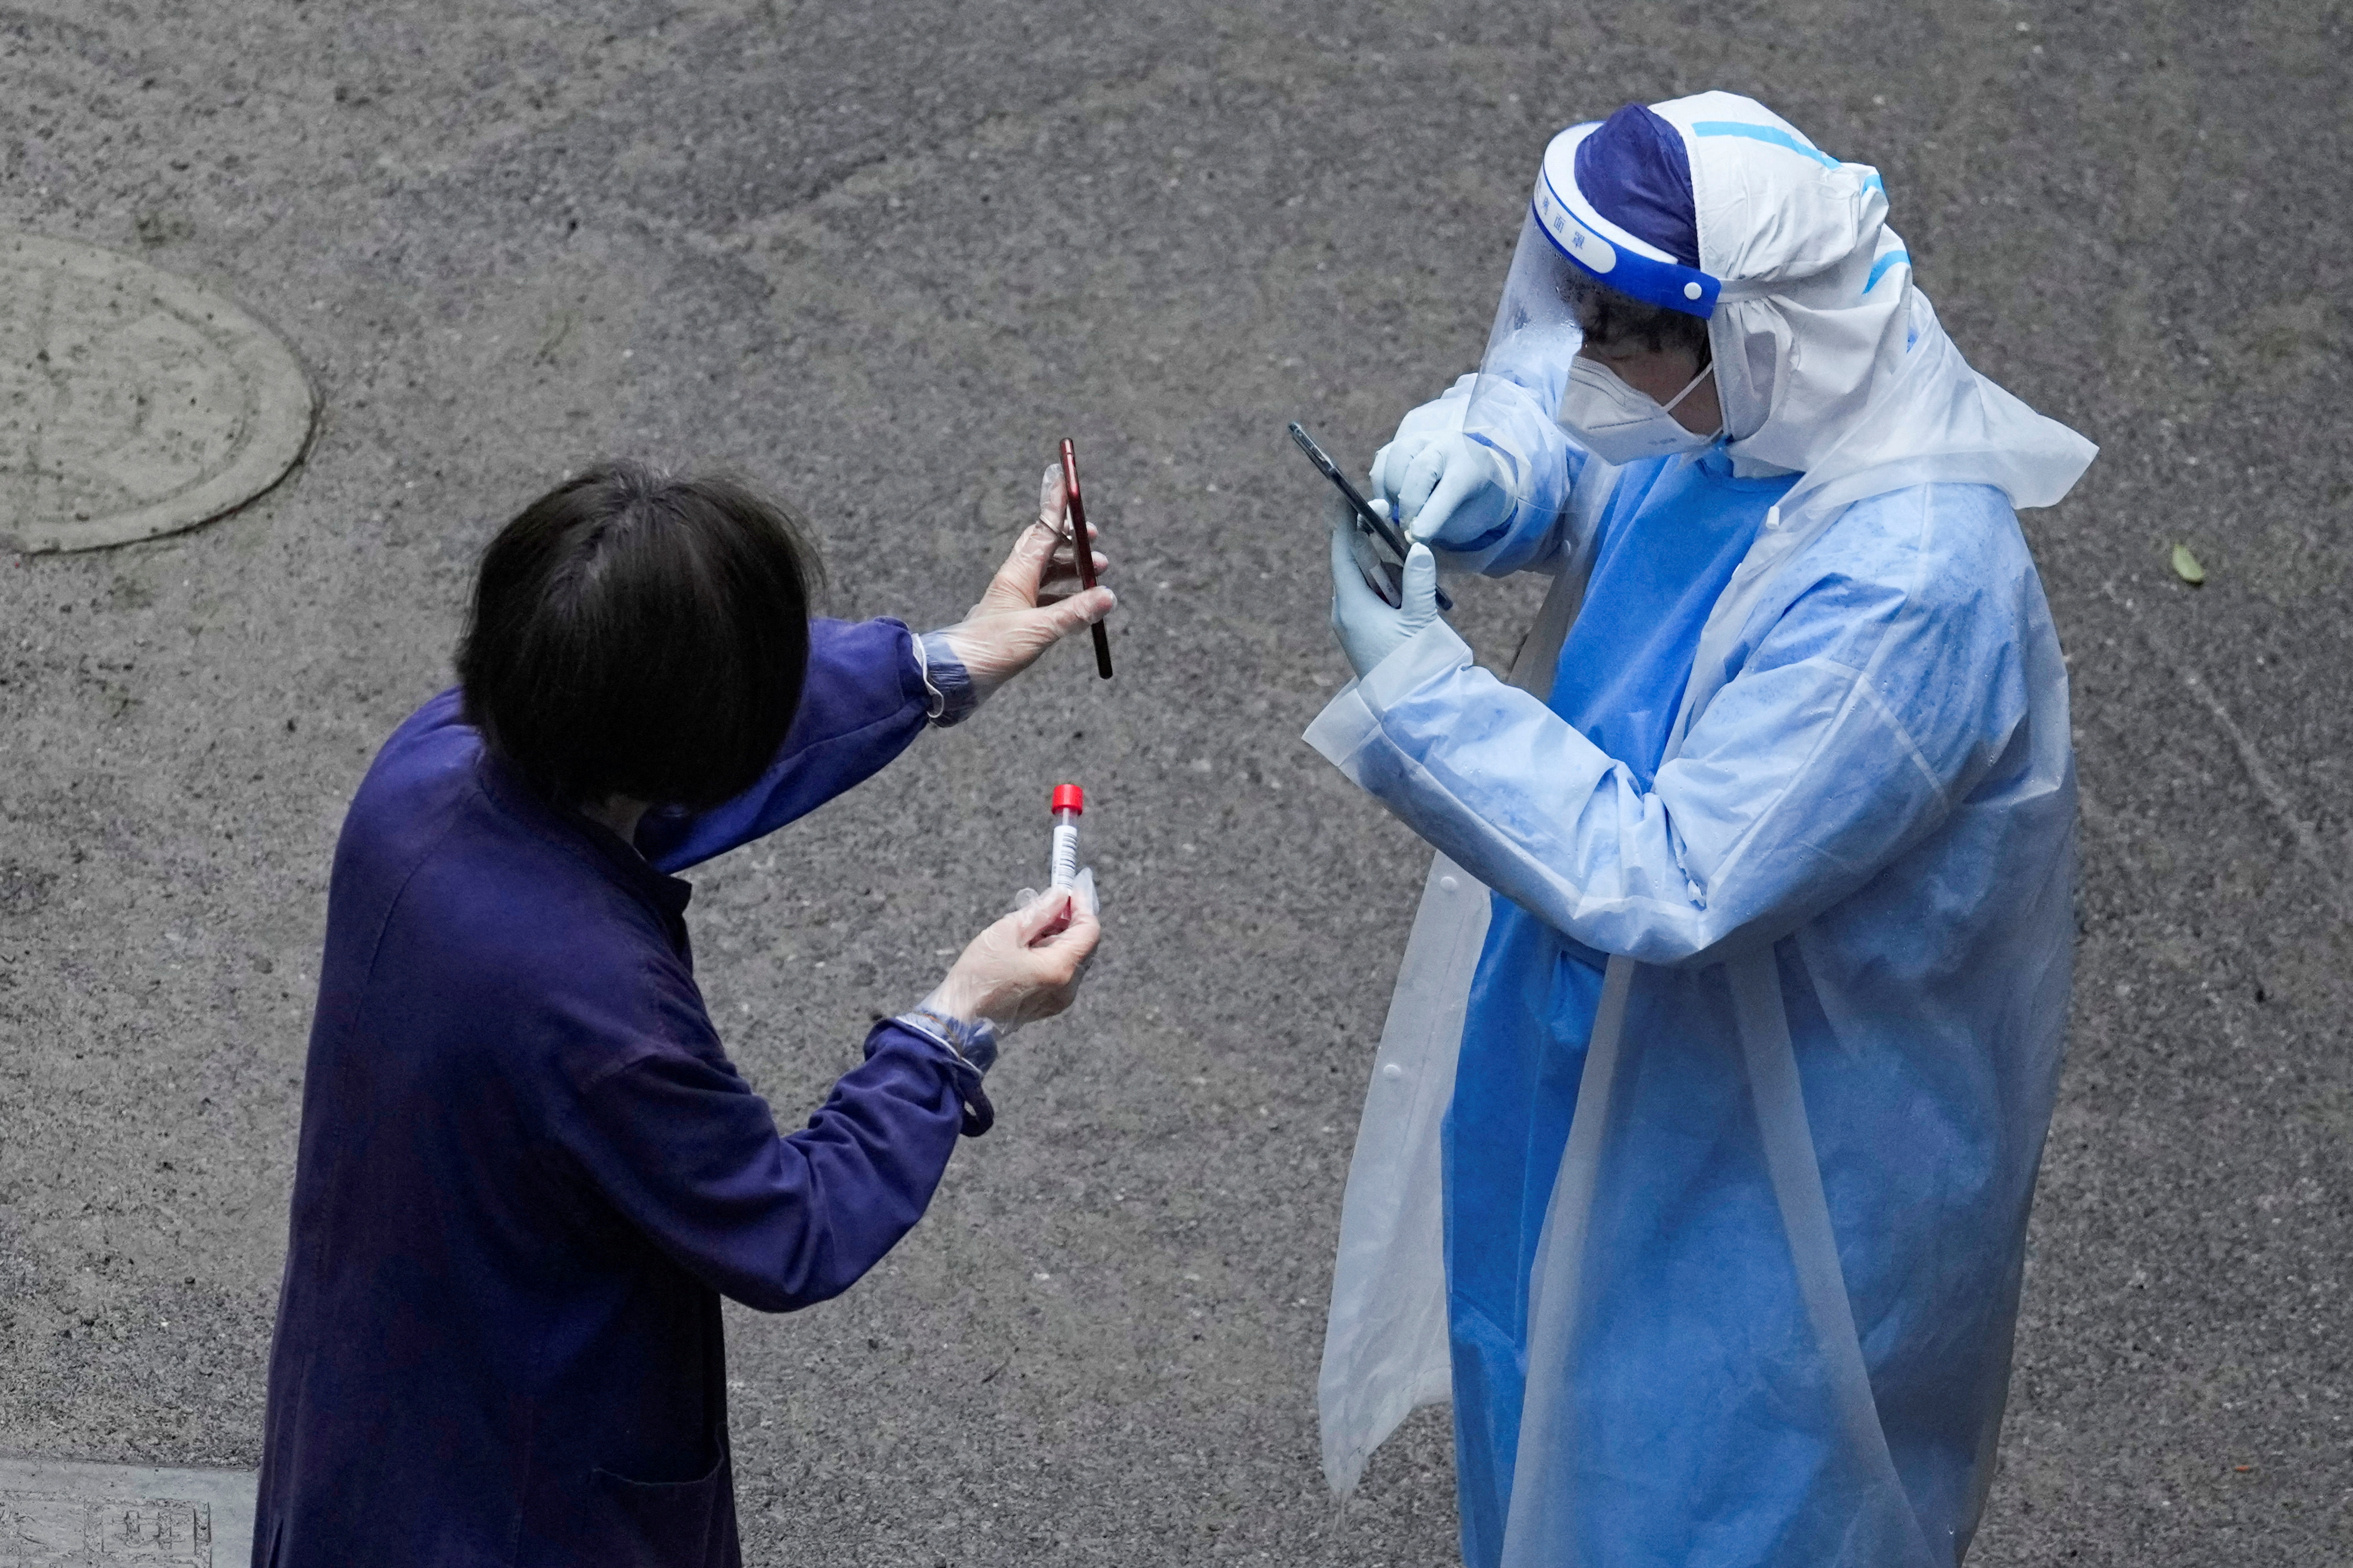 A worker in a protective suit checks the QR code on a resident's phone for nucleic acid testing during the lockdown, amid the coronavirus disease (COVID-19) pandemic, in Shanghai, China